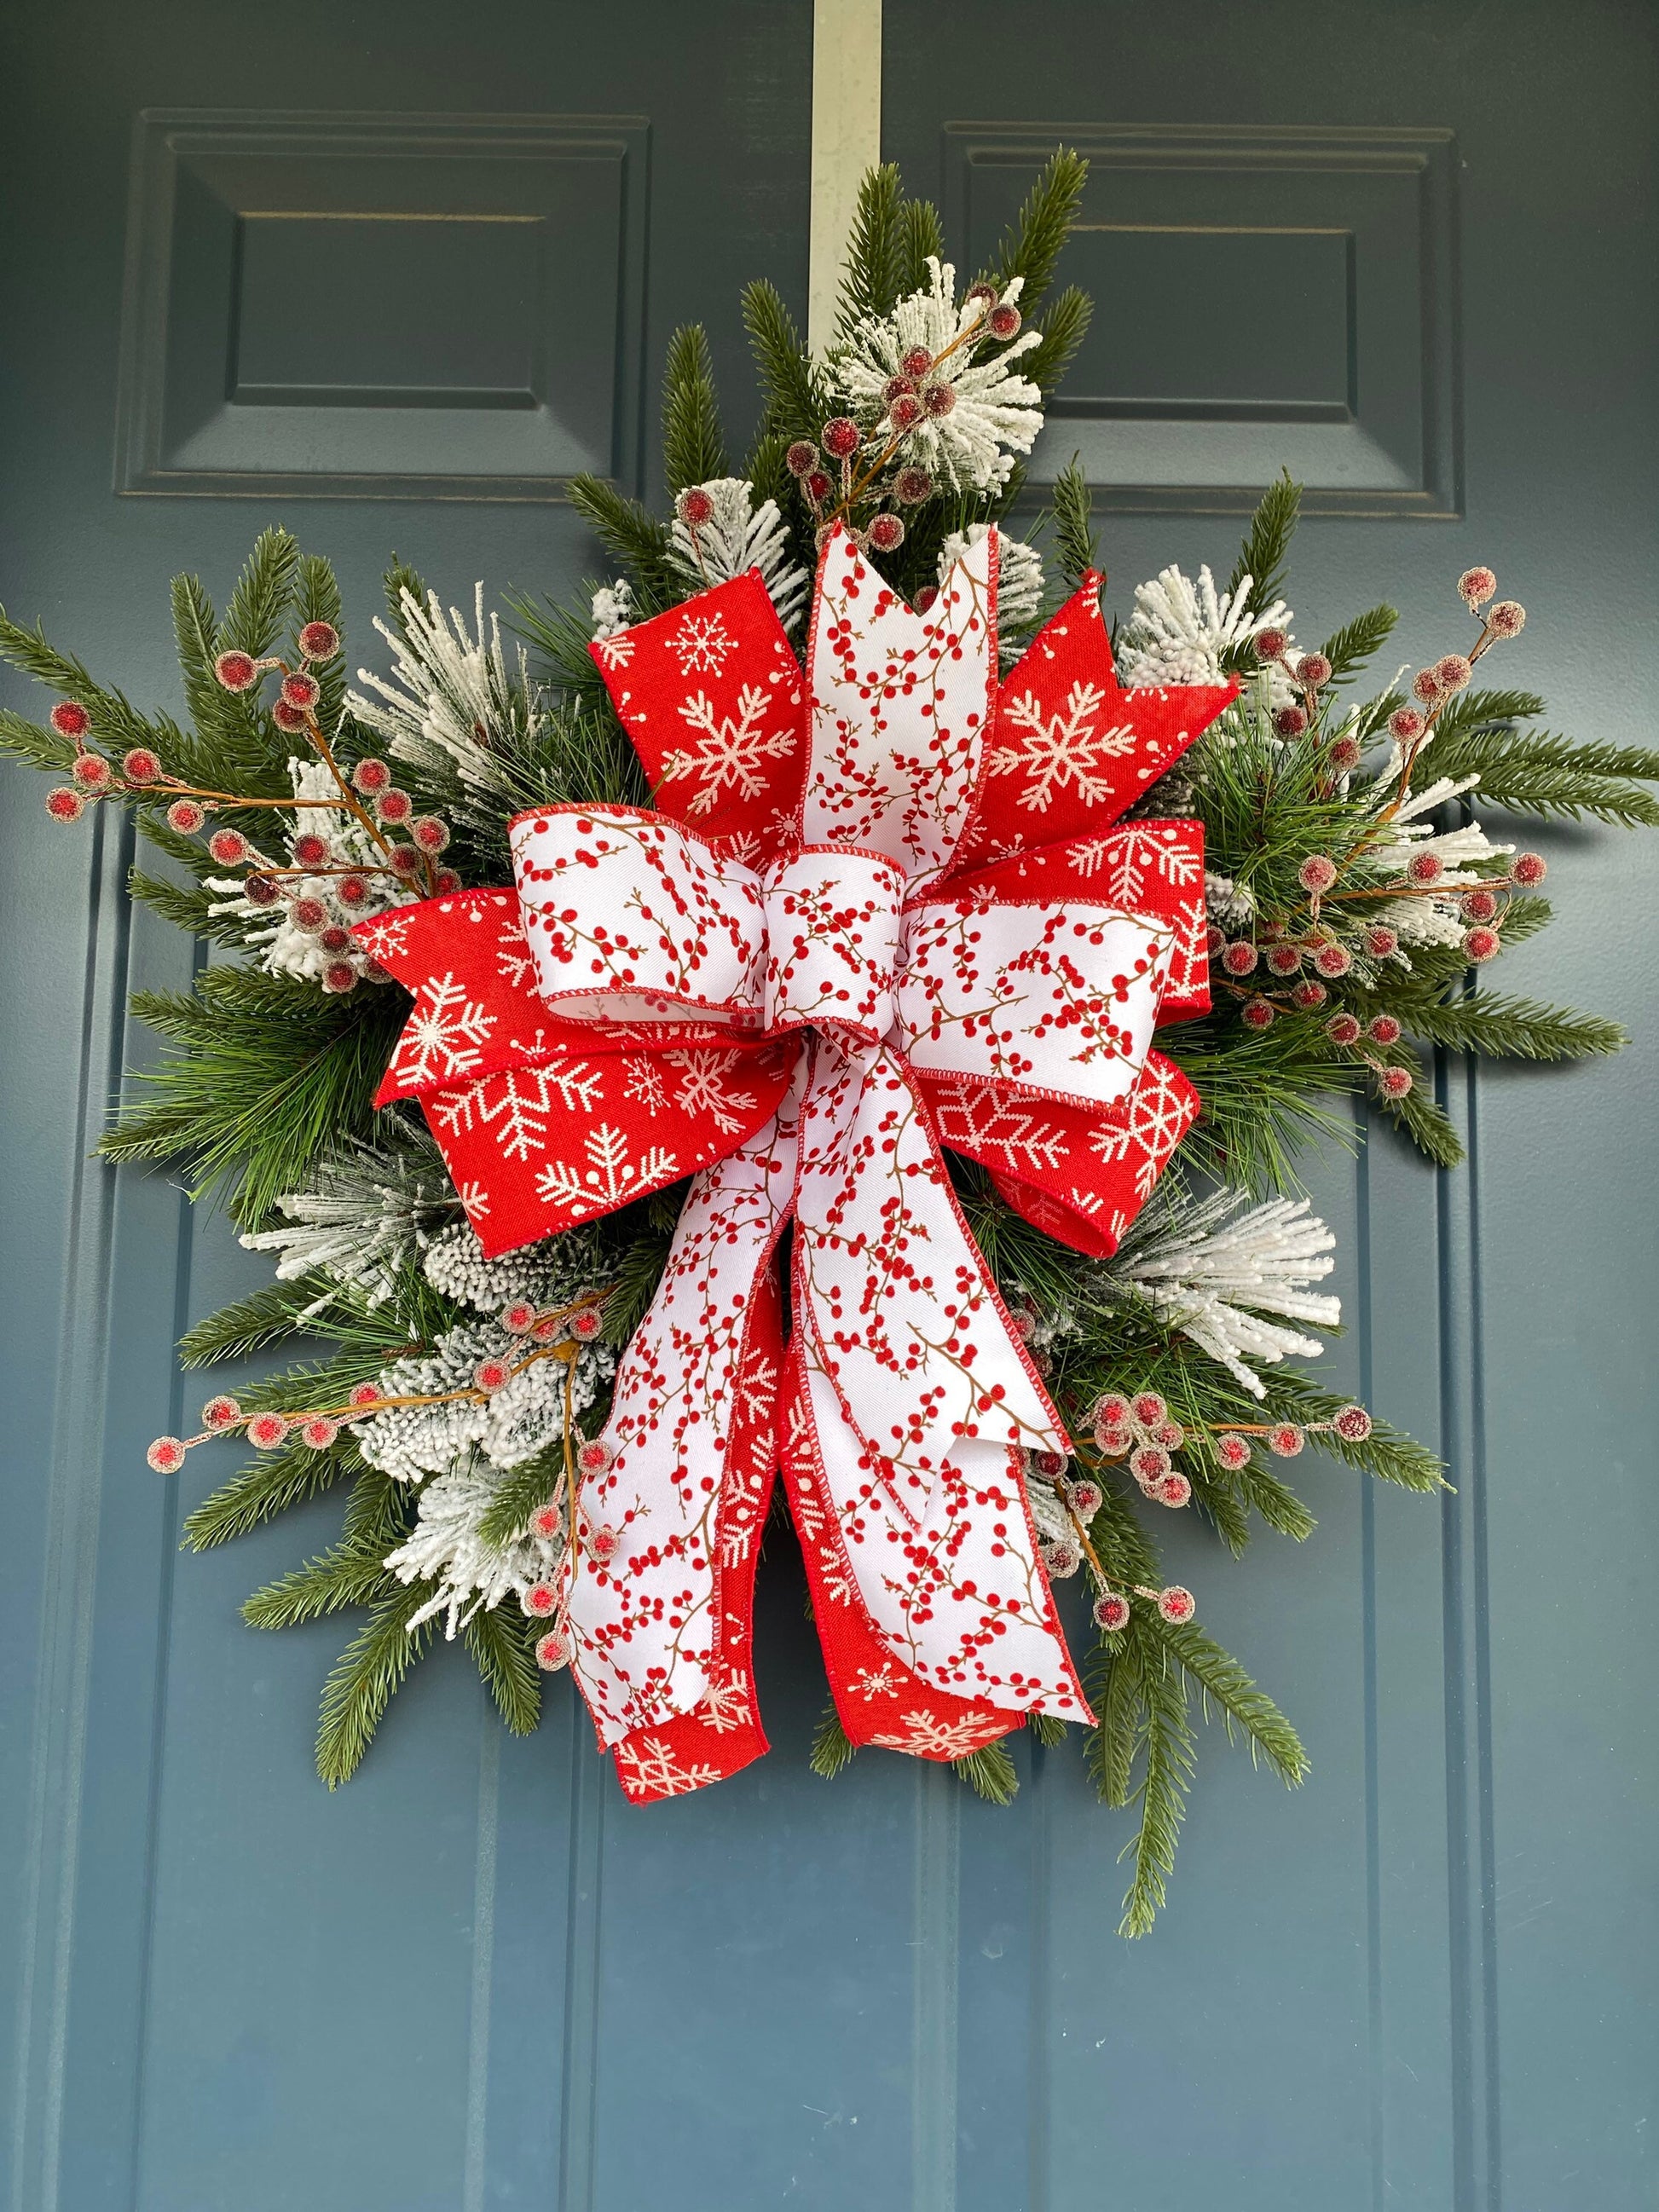 Winter Snowflake Wreath with Red Berries, Artificial Pine Snowflake Shape, Unique Christmas Wall Hanging